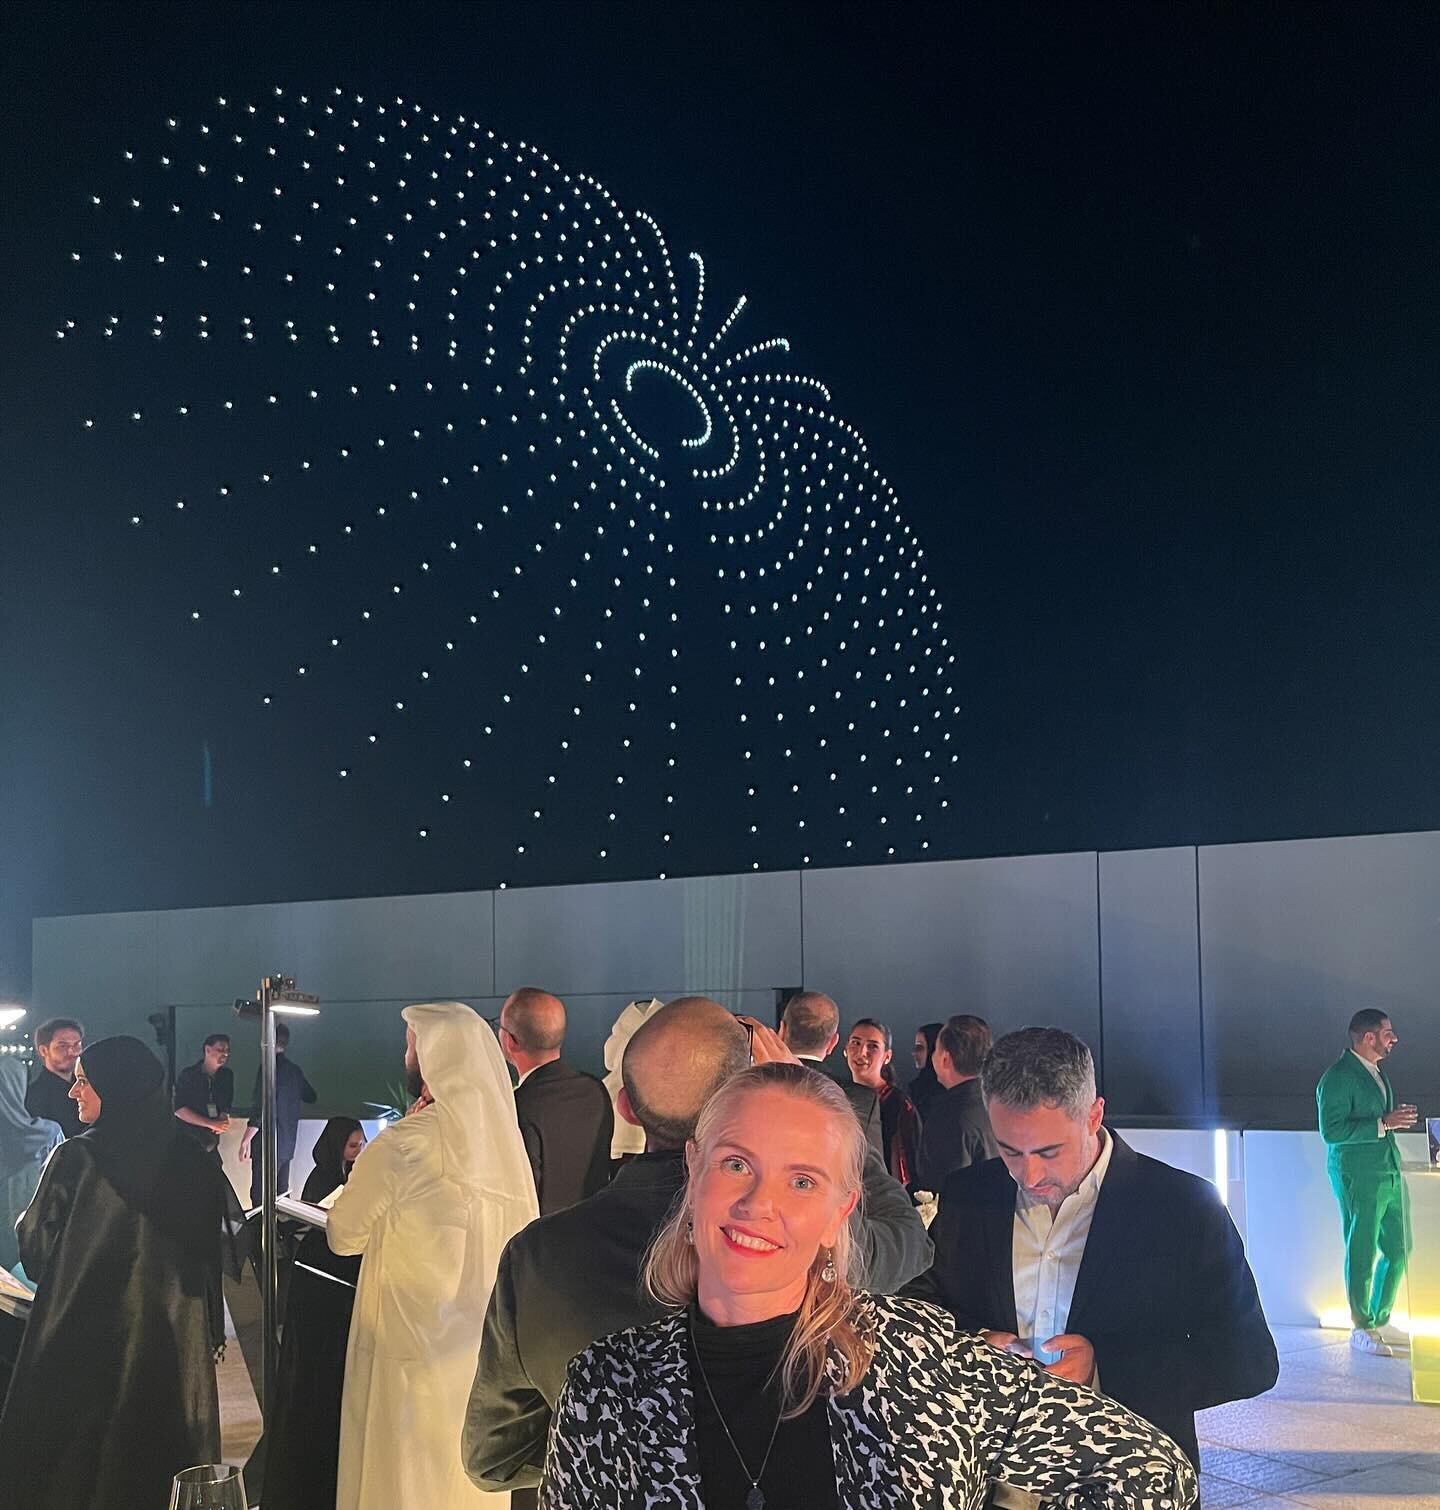 Light, transparencies, moonlight and a drone show.. it was a wonderful evening at @louvreabudhabi hosted by @richardmille to witness the announcement of the winner of the Art Here Now prize &mdash; see the second last slide for the winning art work b